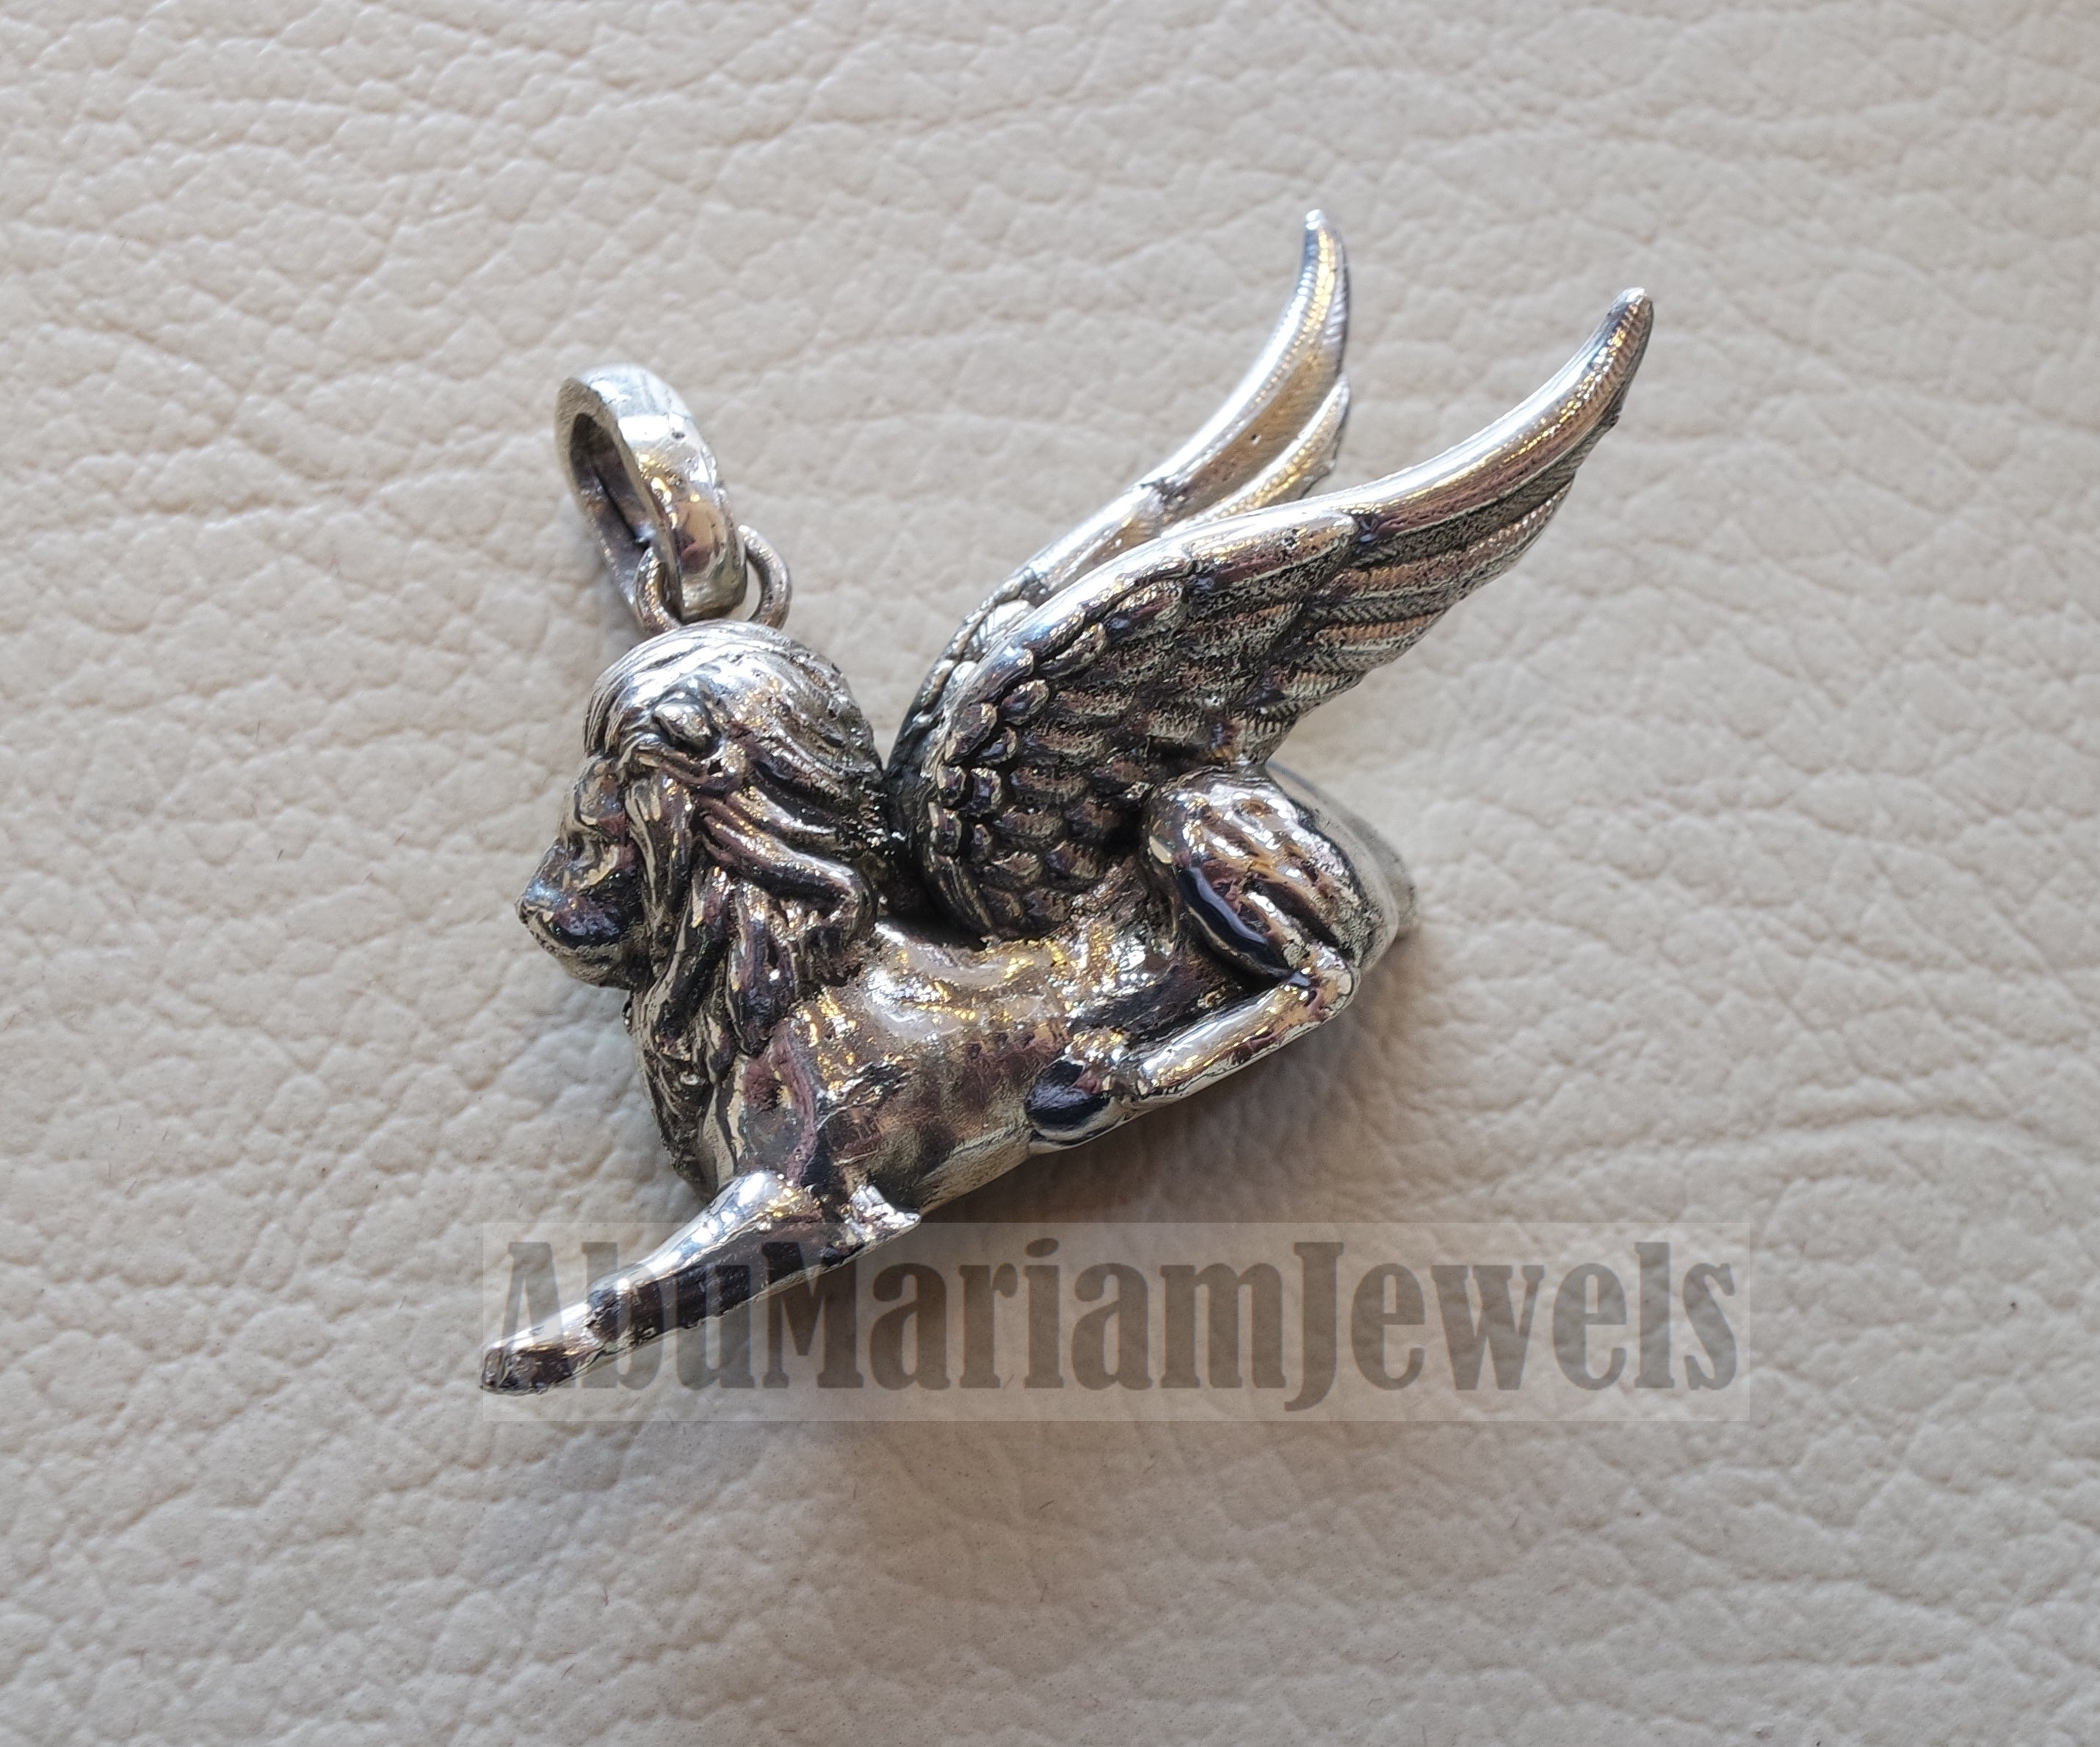 Babylon lion historical mythical winged lion the symbol of ultimate power pendant sterling silver 925 griffin gryphon jewelry